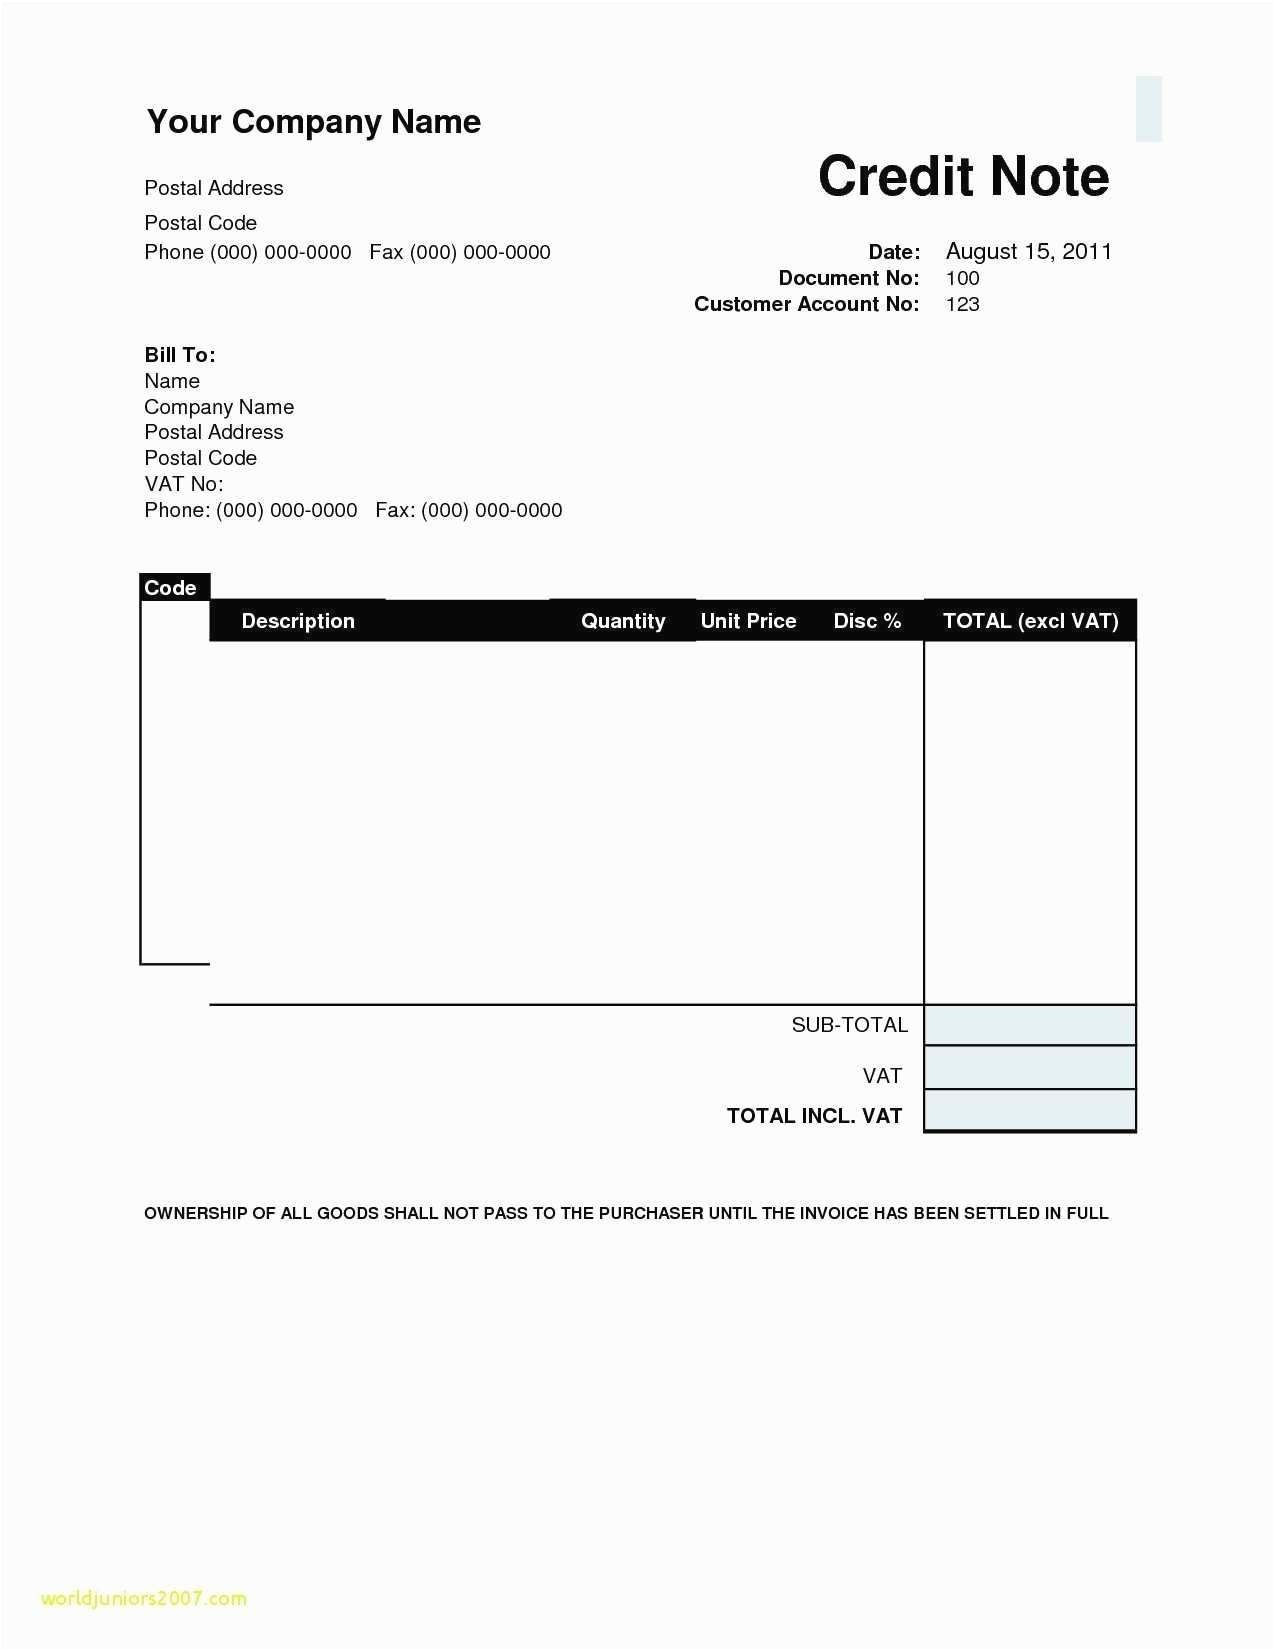 carpet cleaning online quote best of 50 carpet cleaning invoice template photograph